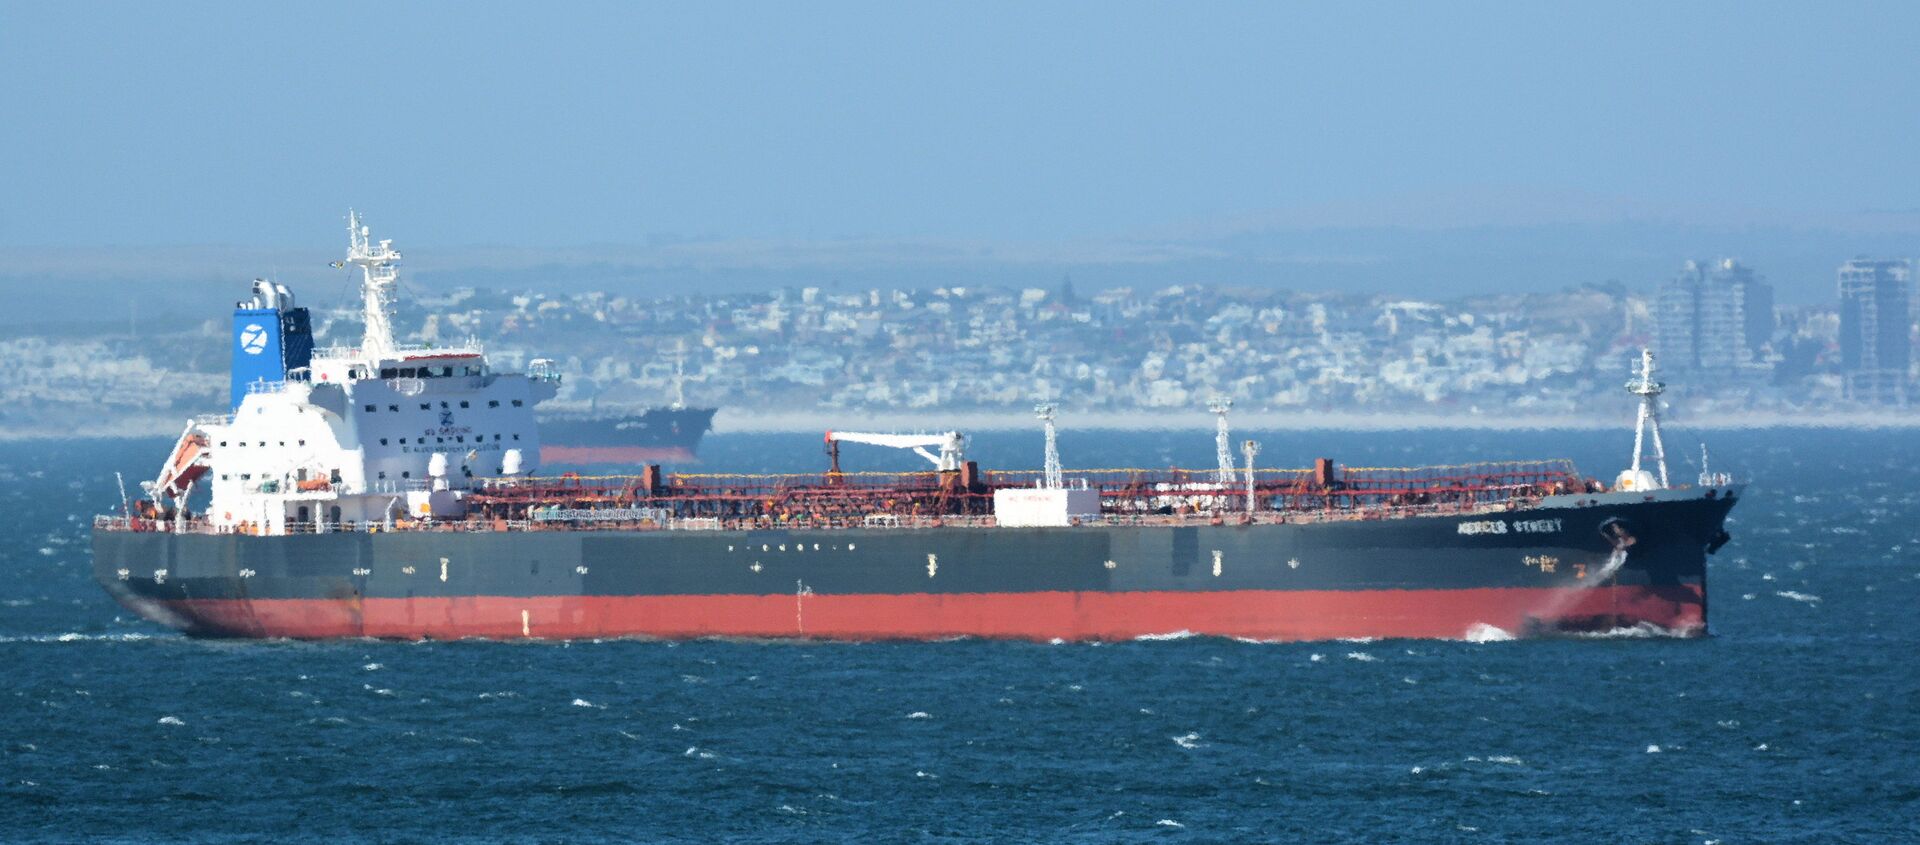 The Mercer Street, a Japanese-owned Liberian-flagged tanker managed by Israeli-owned Zodiac Maritime that was attacked off Oman coast as seen in Cape Town, South Africa, December 31, 2015  in this picture obtained from ship tracker website, MarineTraffic.com. Picture taken December 31, 2015.  Johan Victor/Handout via REUTERS THIS IMAGE HAS BEEN SUPPLIED BY A THIRD PARTY. MANDATORY CREDIT. NO RESALES. NO ARCHIVES. - Sputnik International, 1920, 04.08.2021